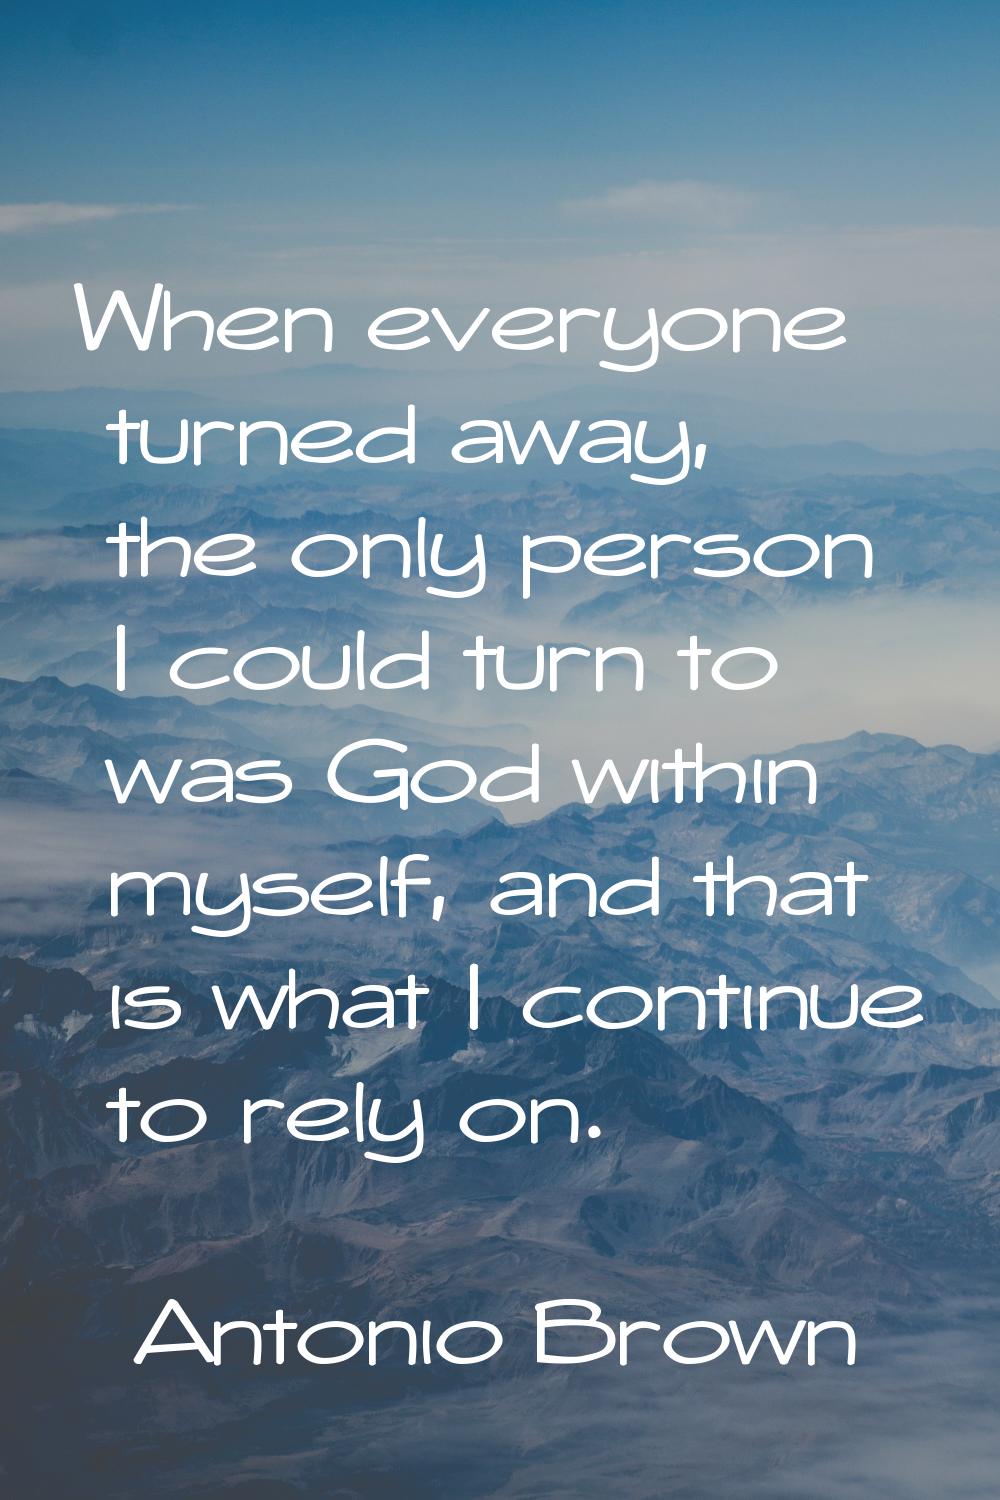 When everyone turned away, the only person I could turn to was God within myself, and that is what 